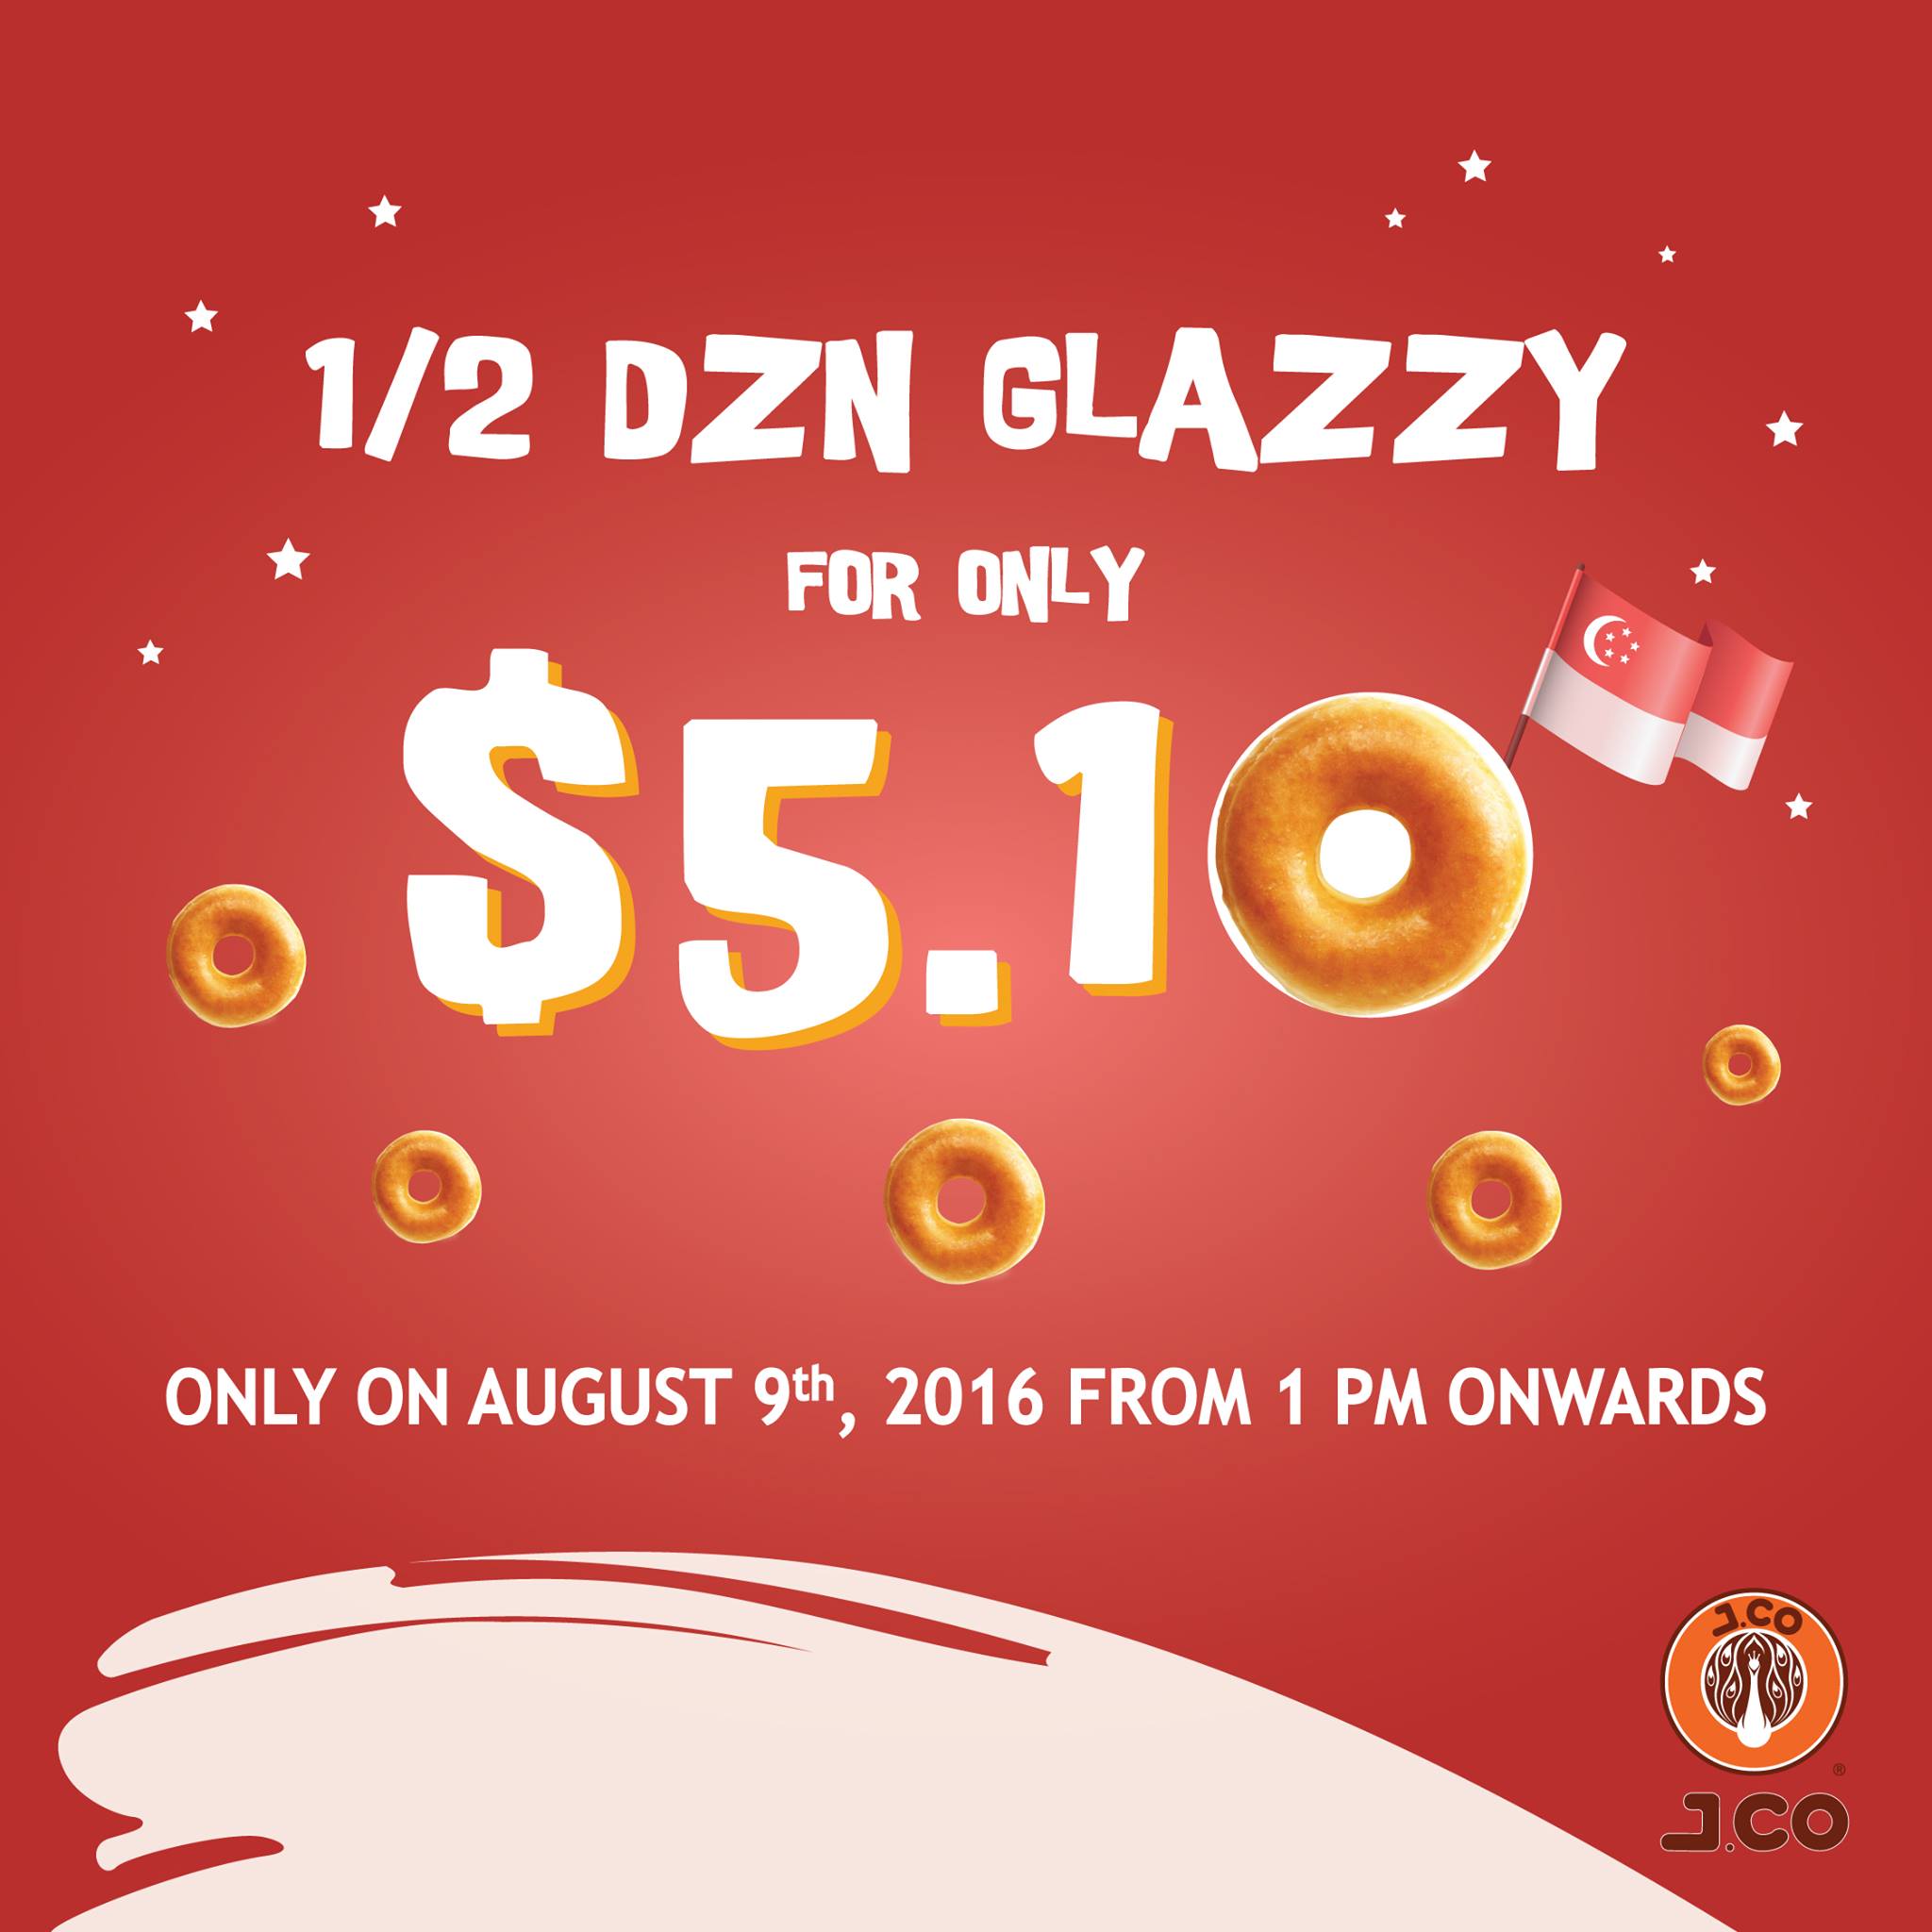 J.CO Donuts Singapore $5.10 Glazzy Donuts National Day Promotion 9 Aug 2016